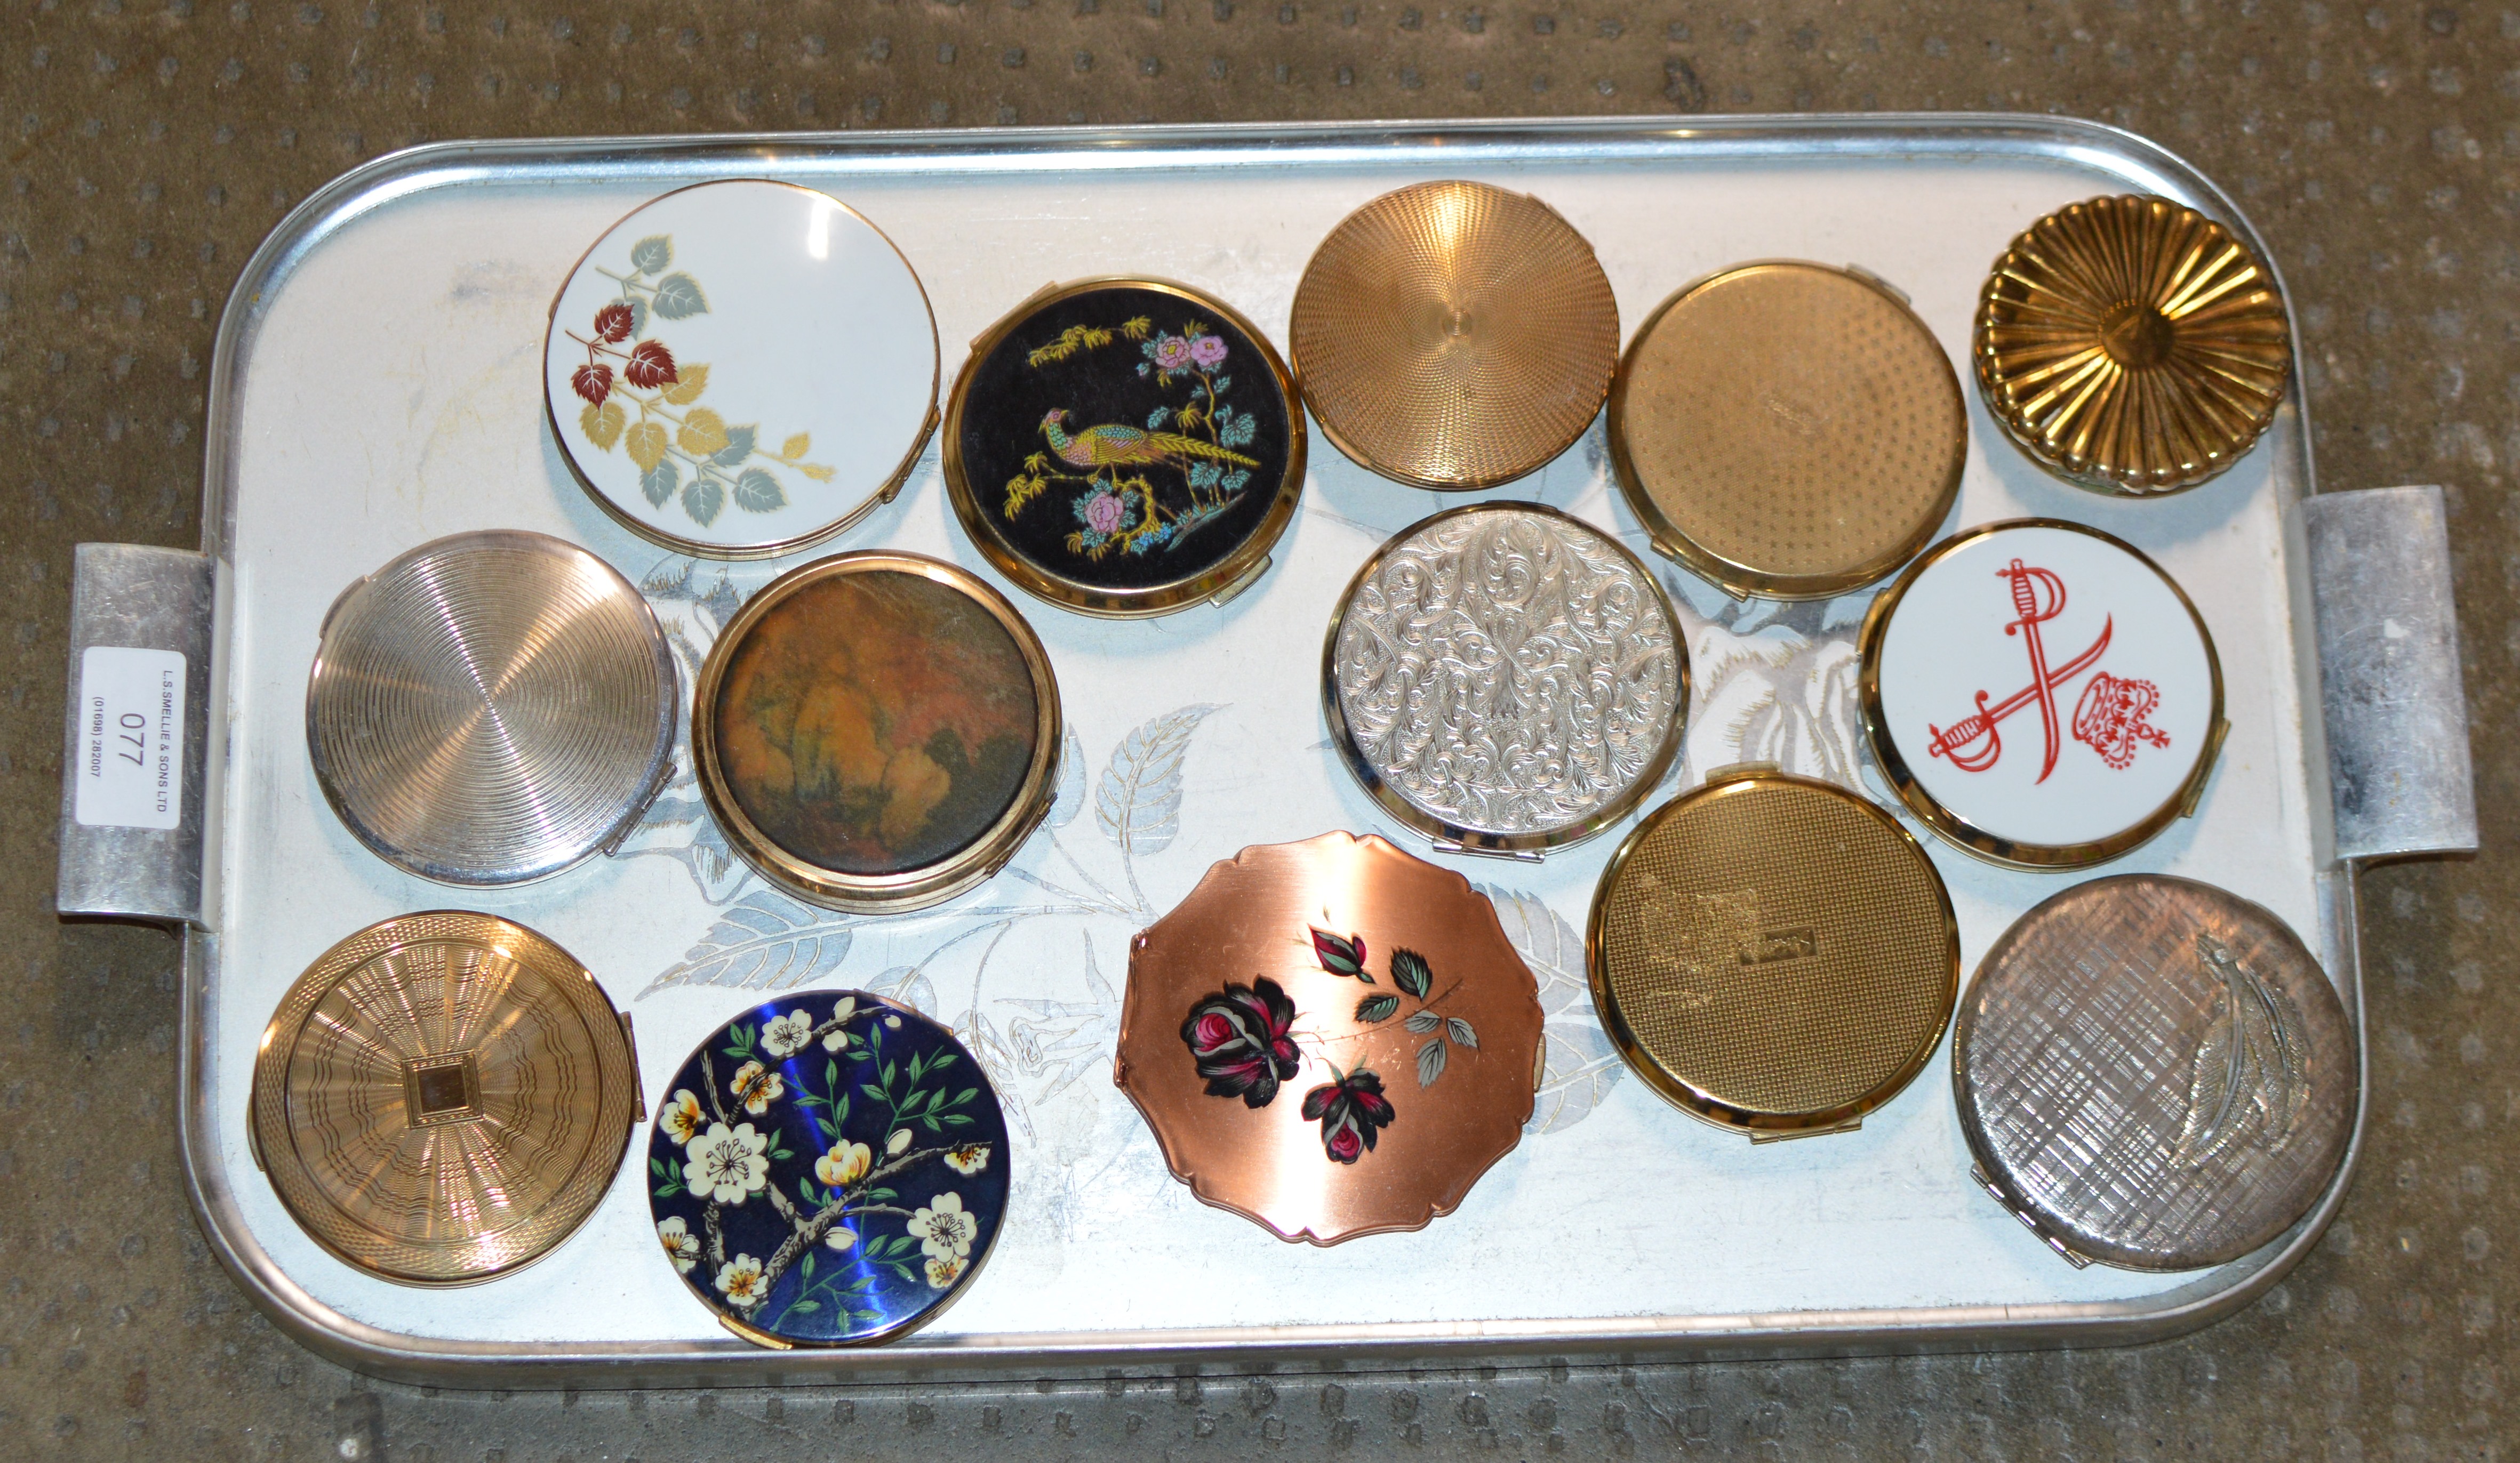 TRAY WITH 14 VARIOUS POWDER COMPACTS